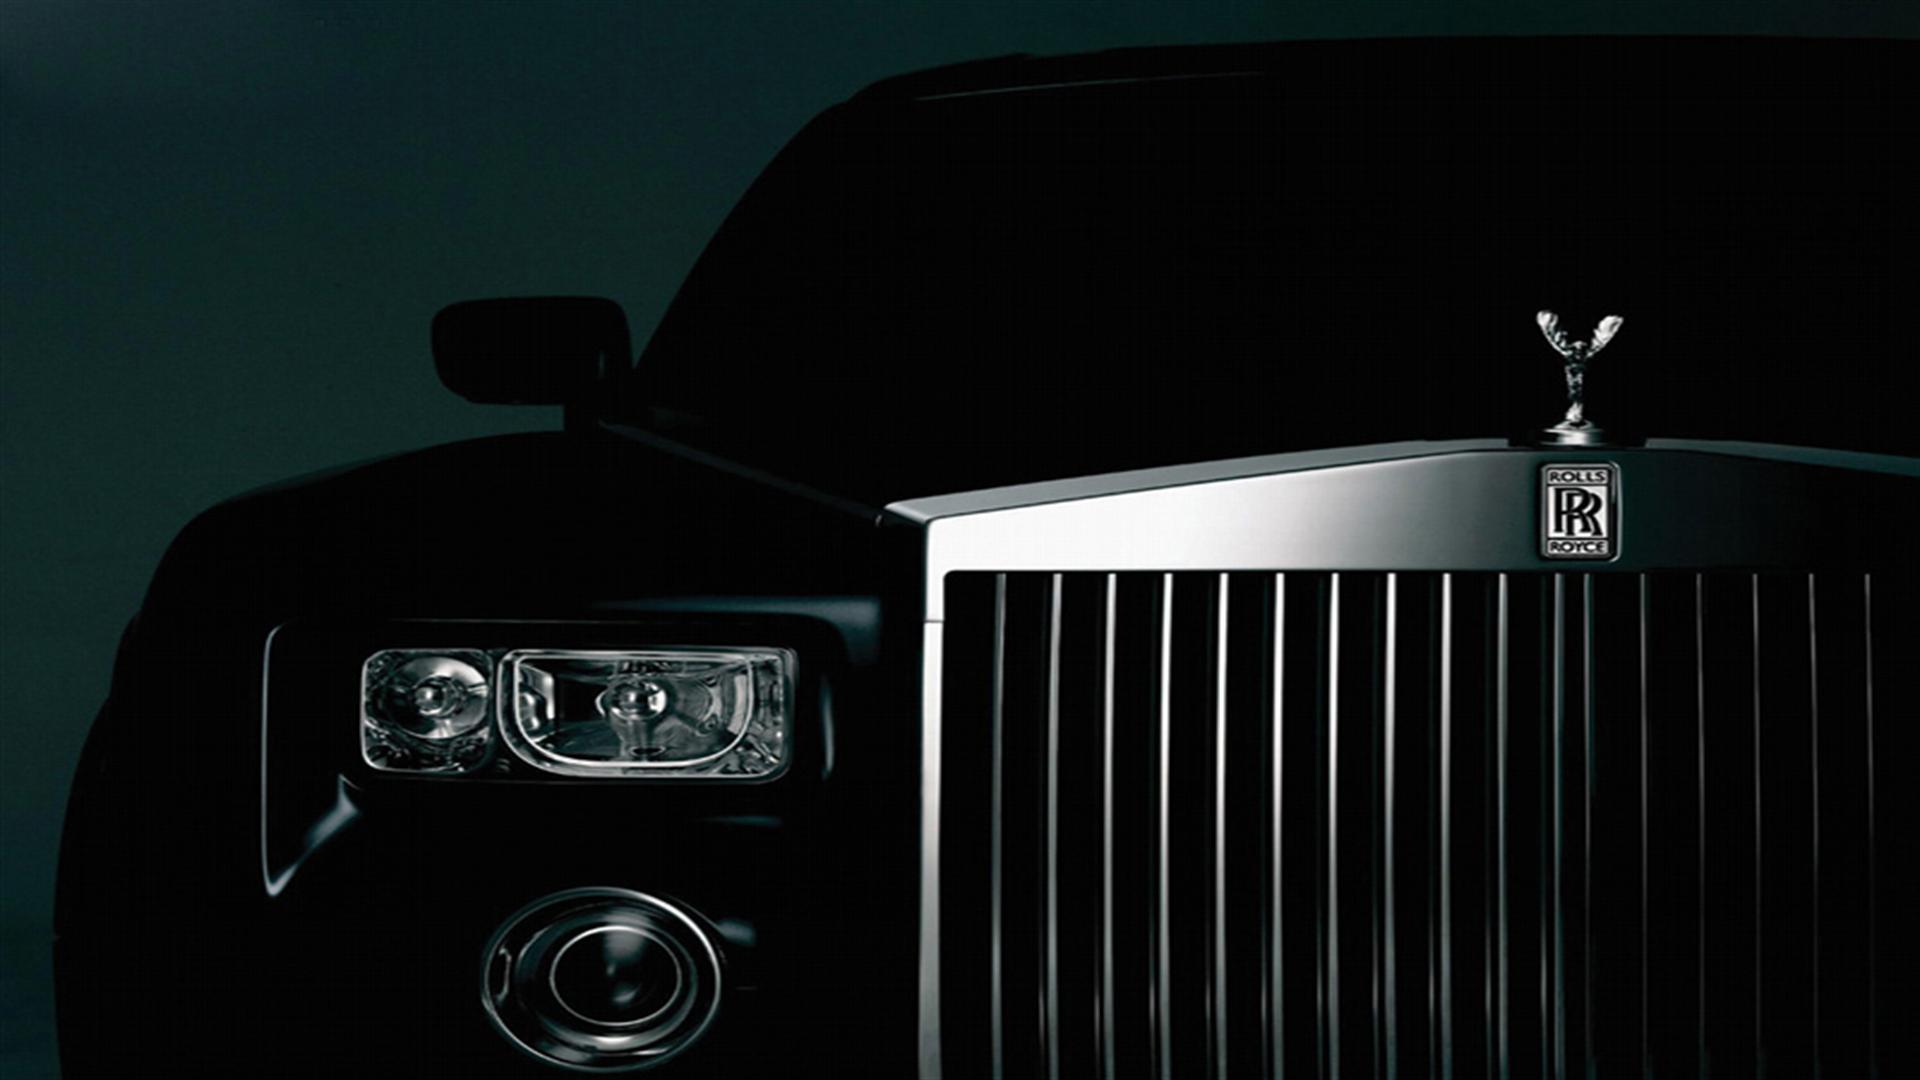 Background selected, Vintage cars rolls Royce